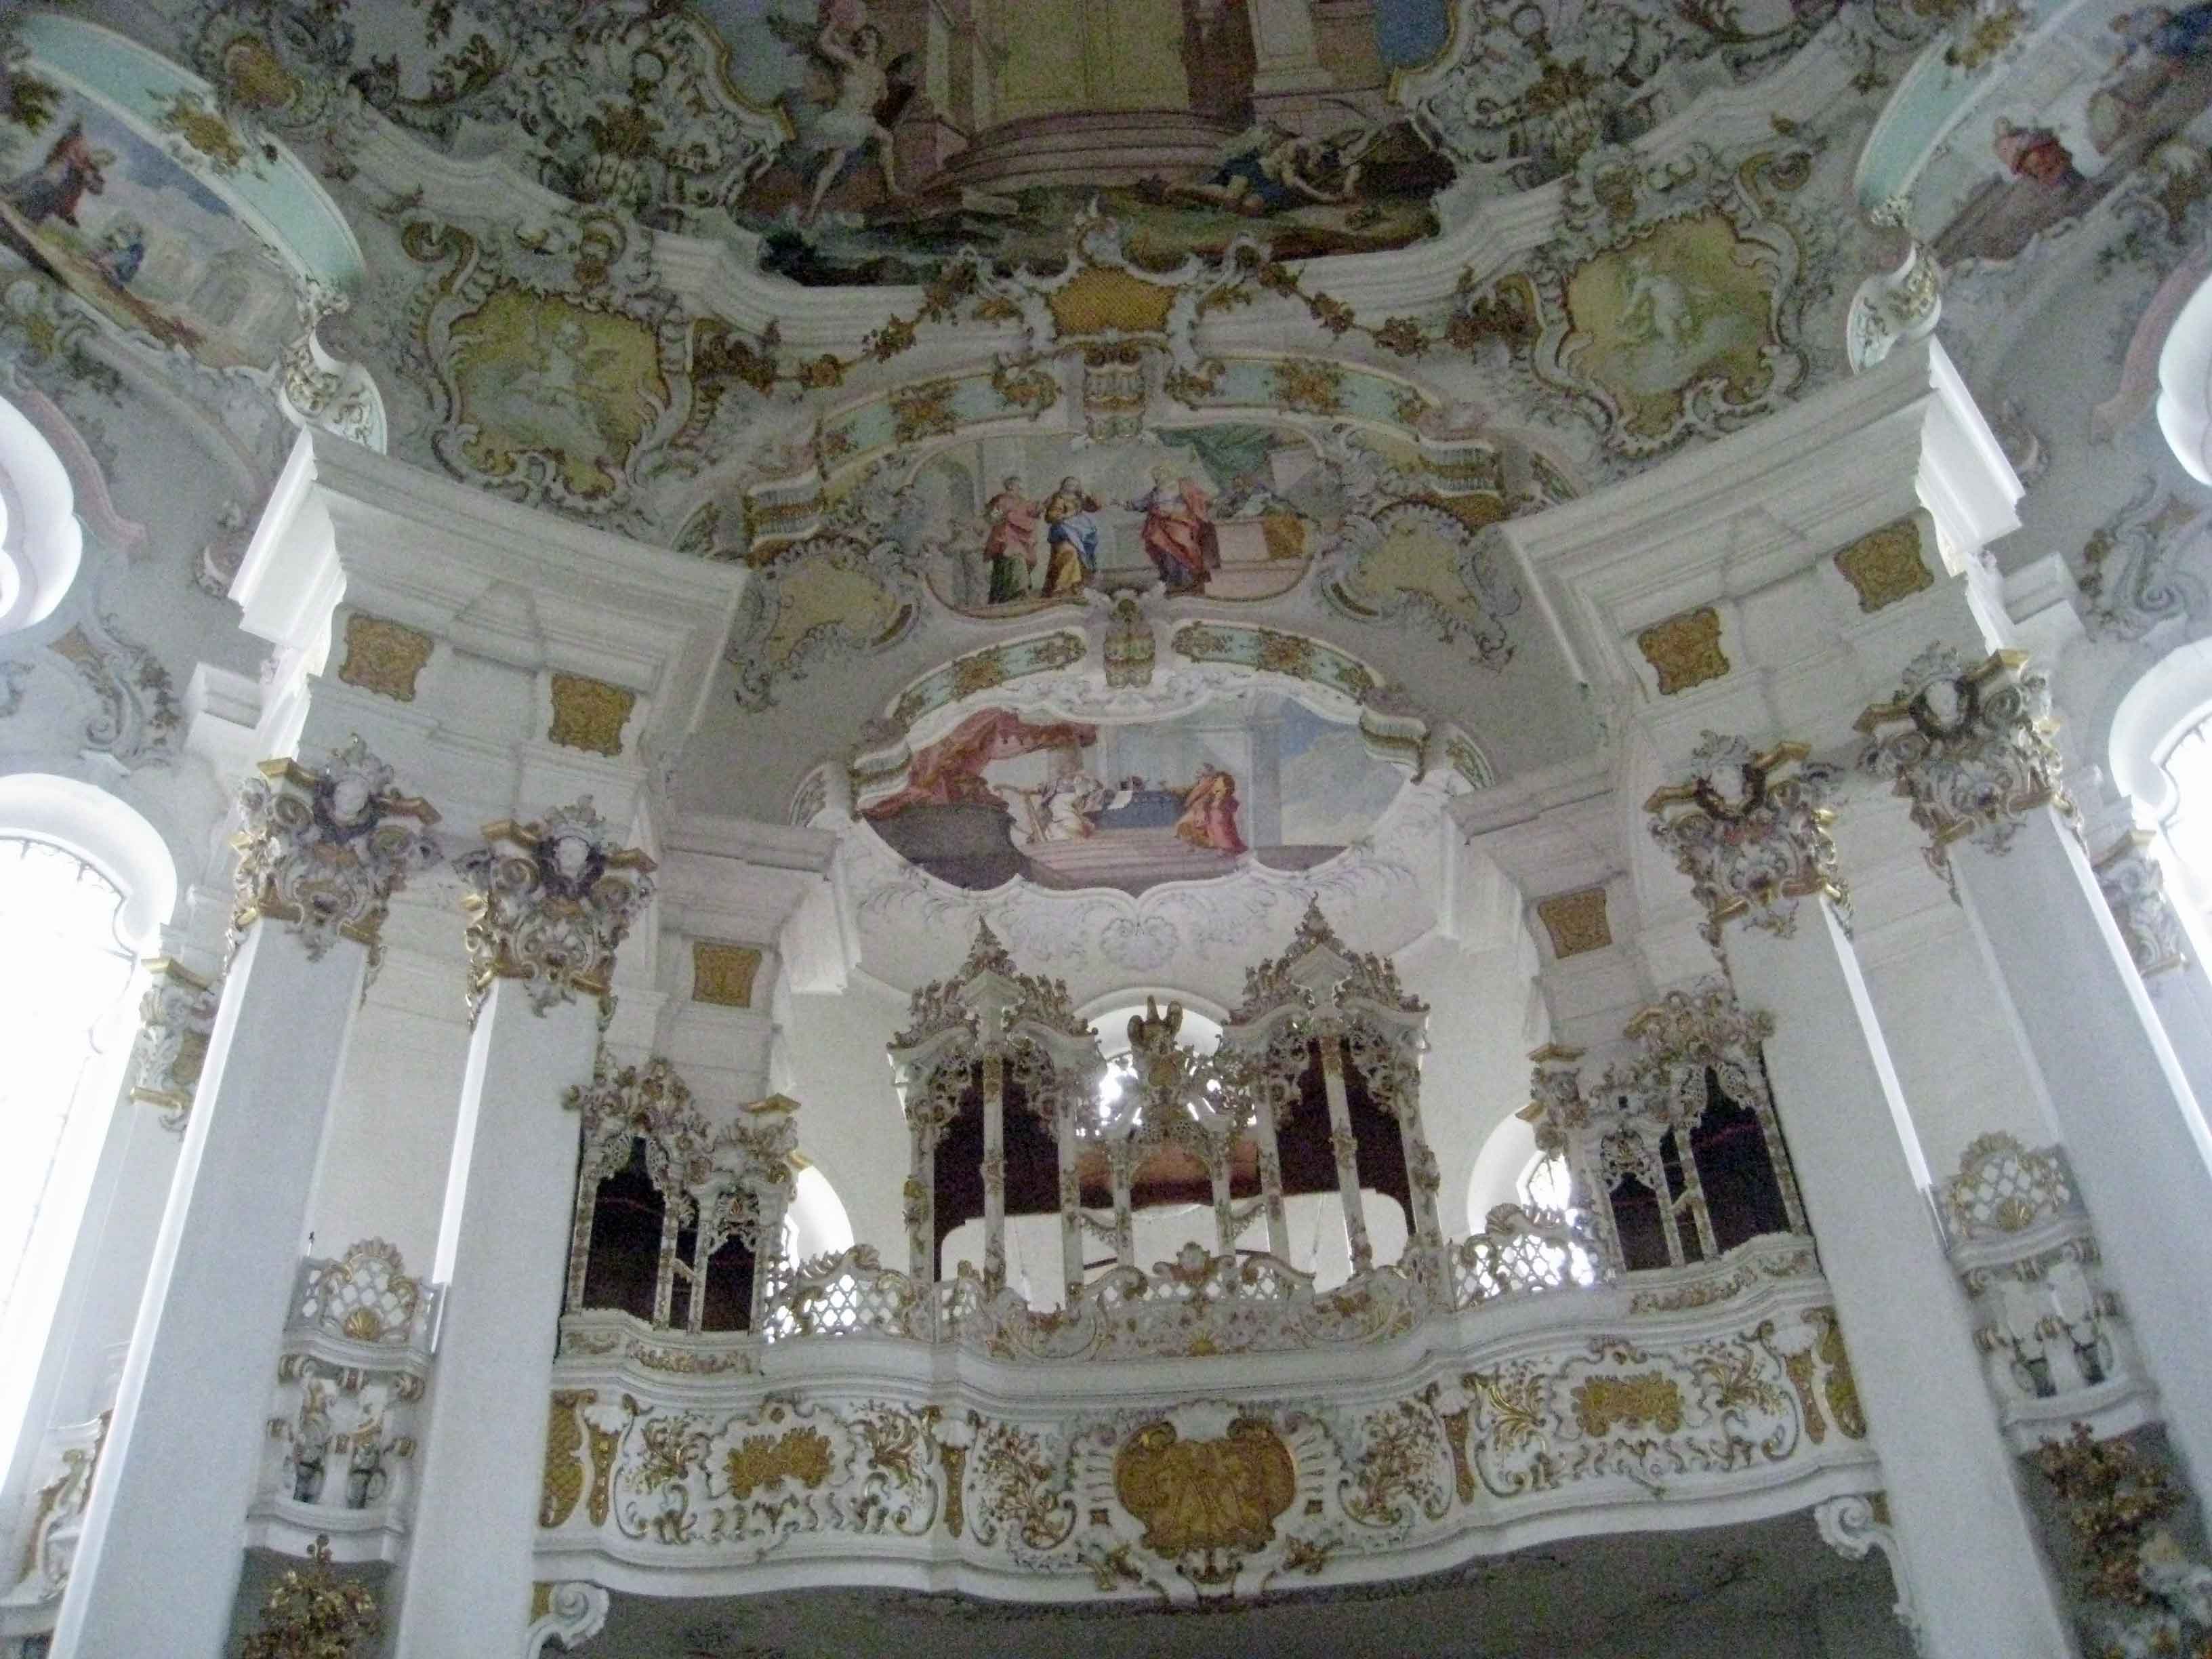 Wieskirche - Organ gallery has room for the organ,a choir and an orchestra